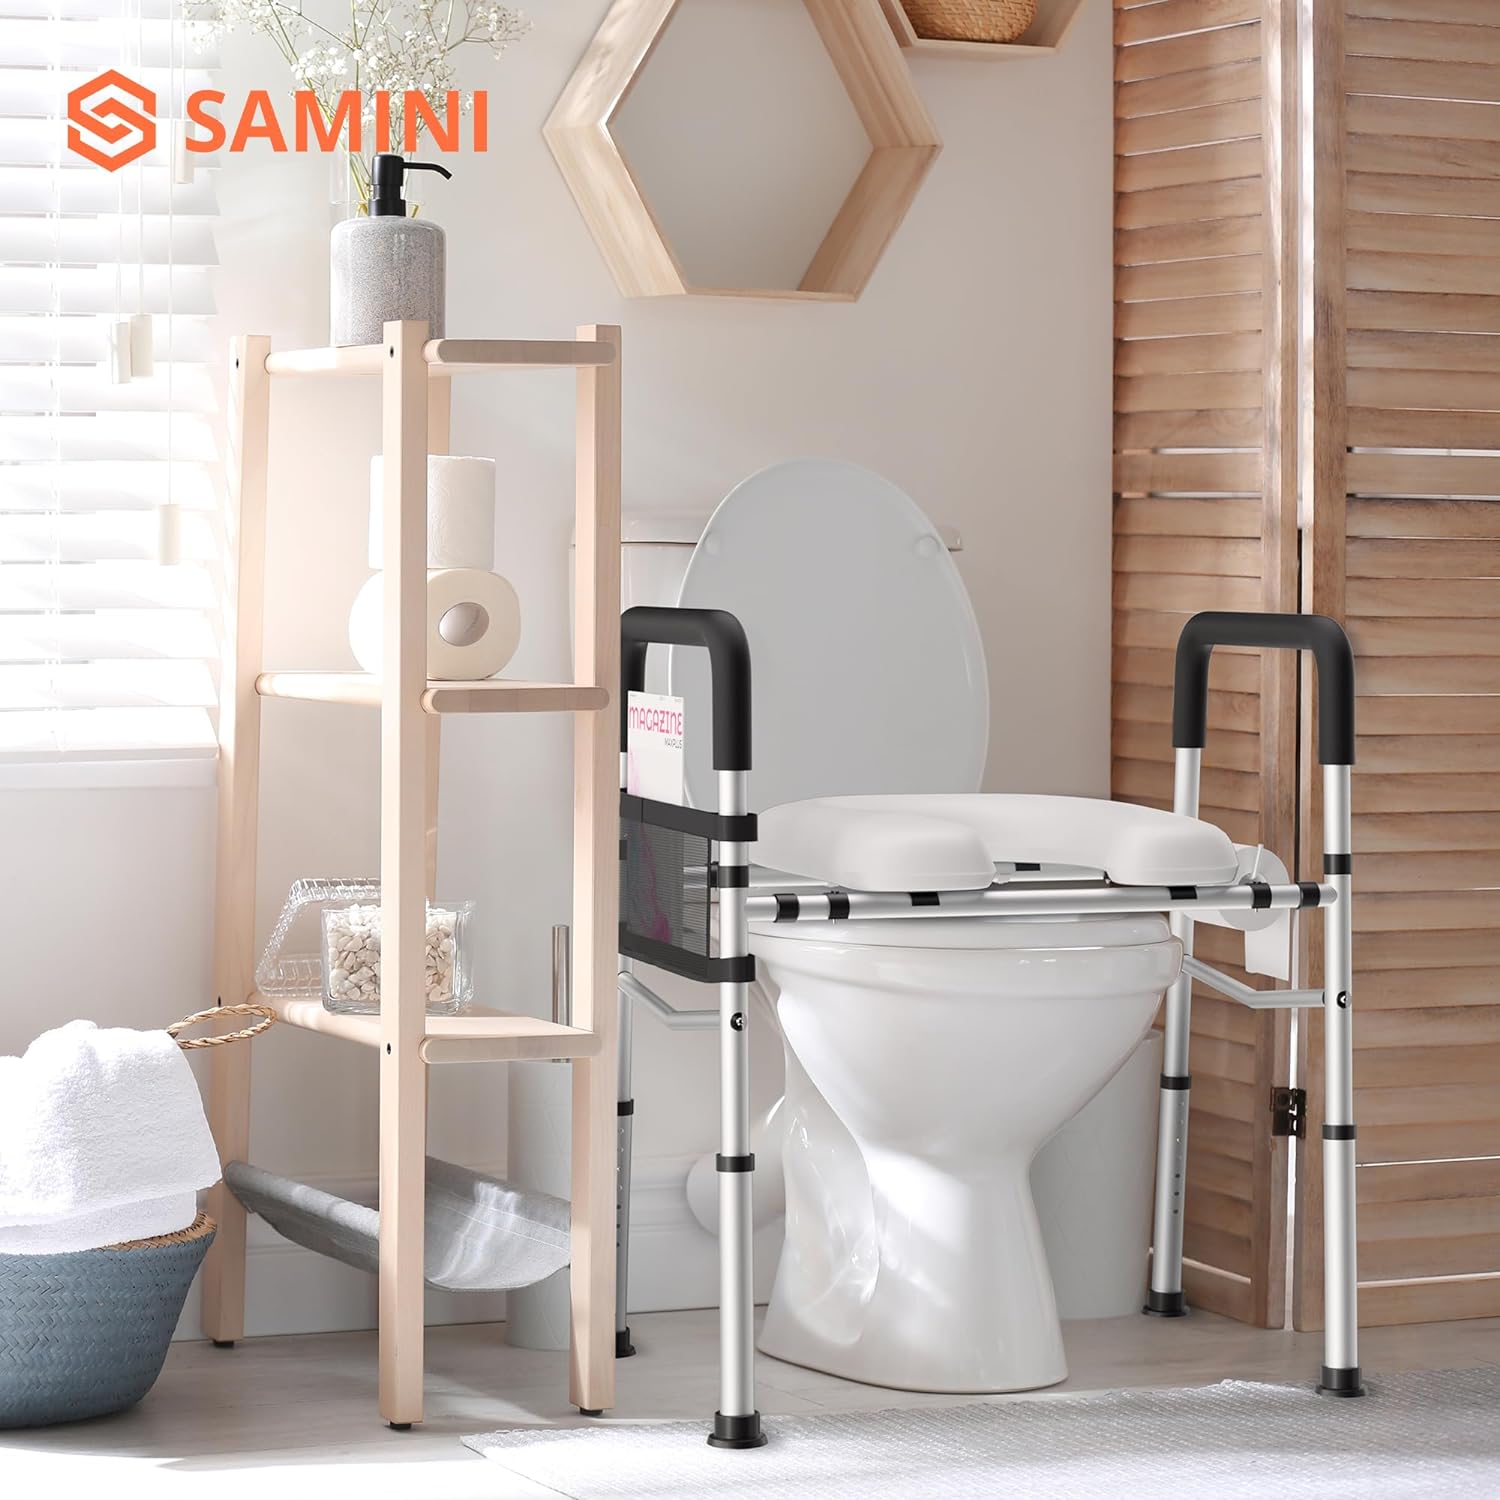 Toilet Seat Risers, Raised Toilet Seat Riser with Handles Elevated Over Toilet Stand Alone Elongated